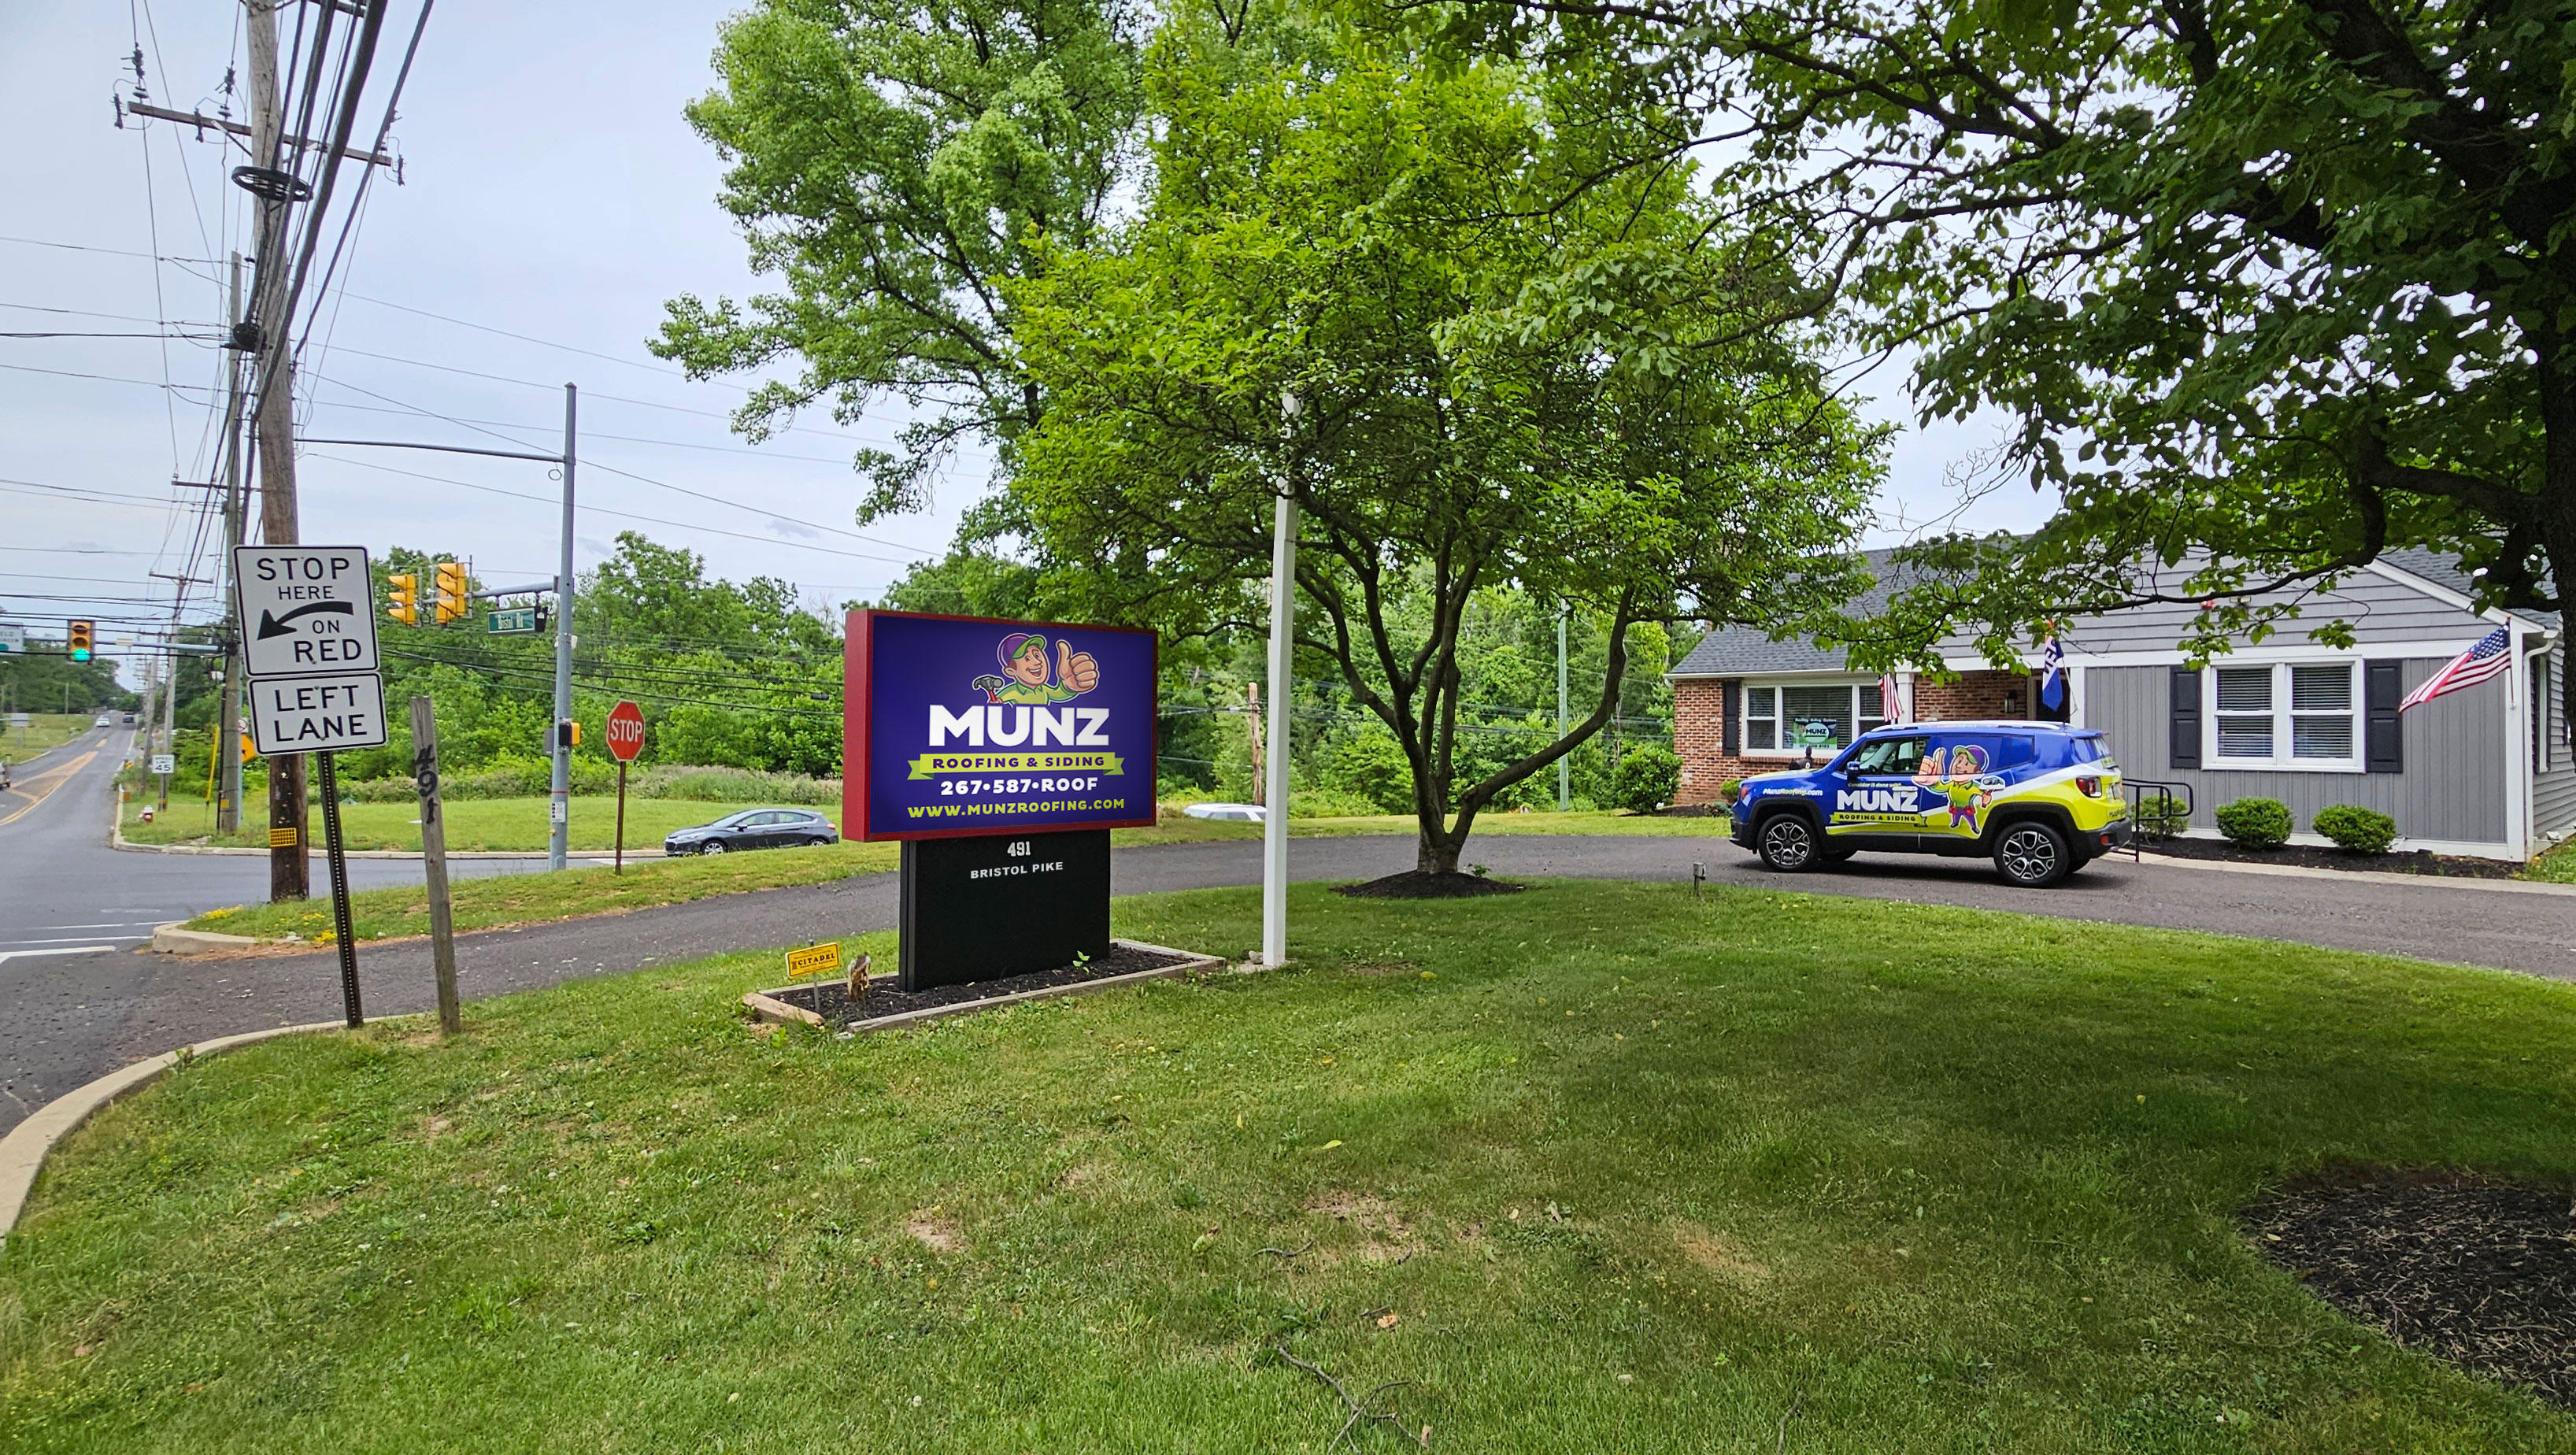 Munz Roofing Services